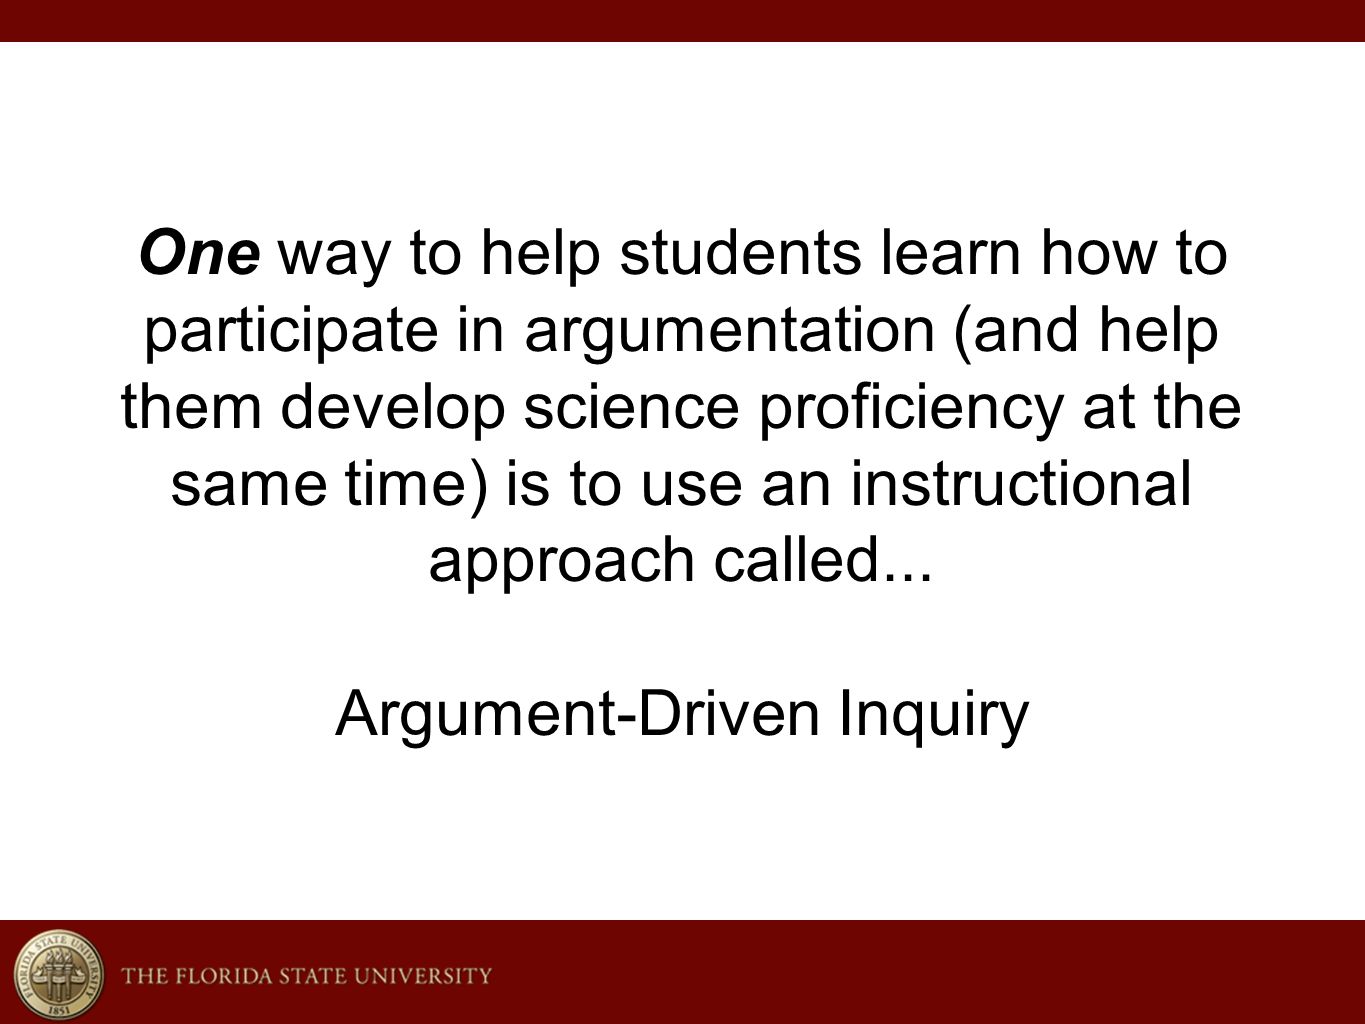 One way to help students learn how to participate in argumentation (and help them develop science proficiency at the same time) is to use an instructional approach called...